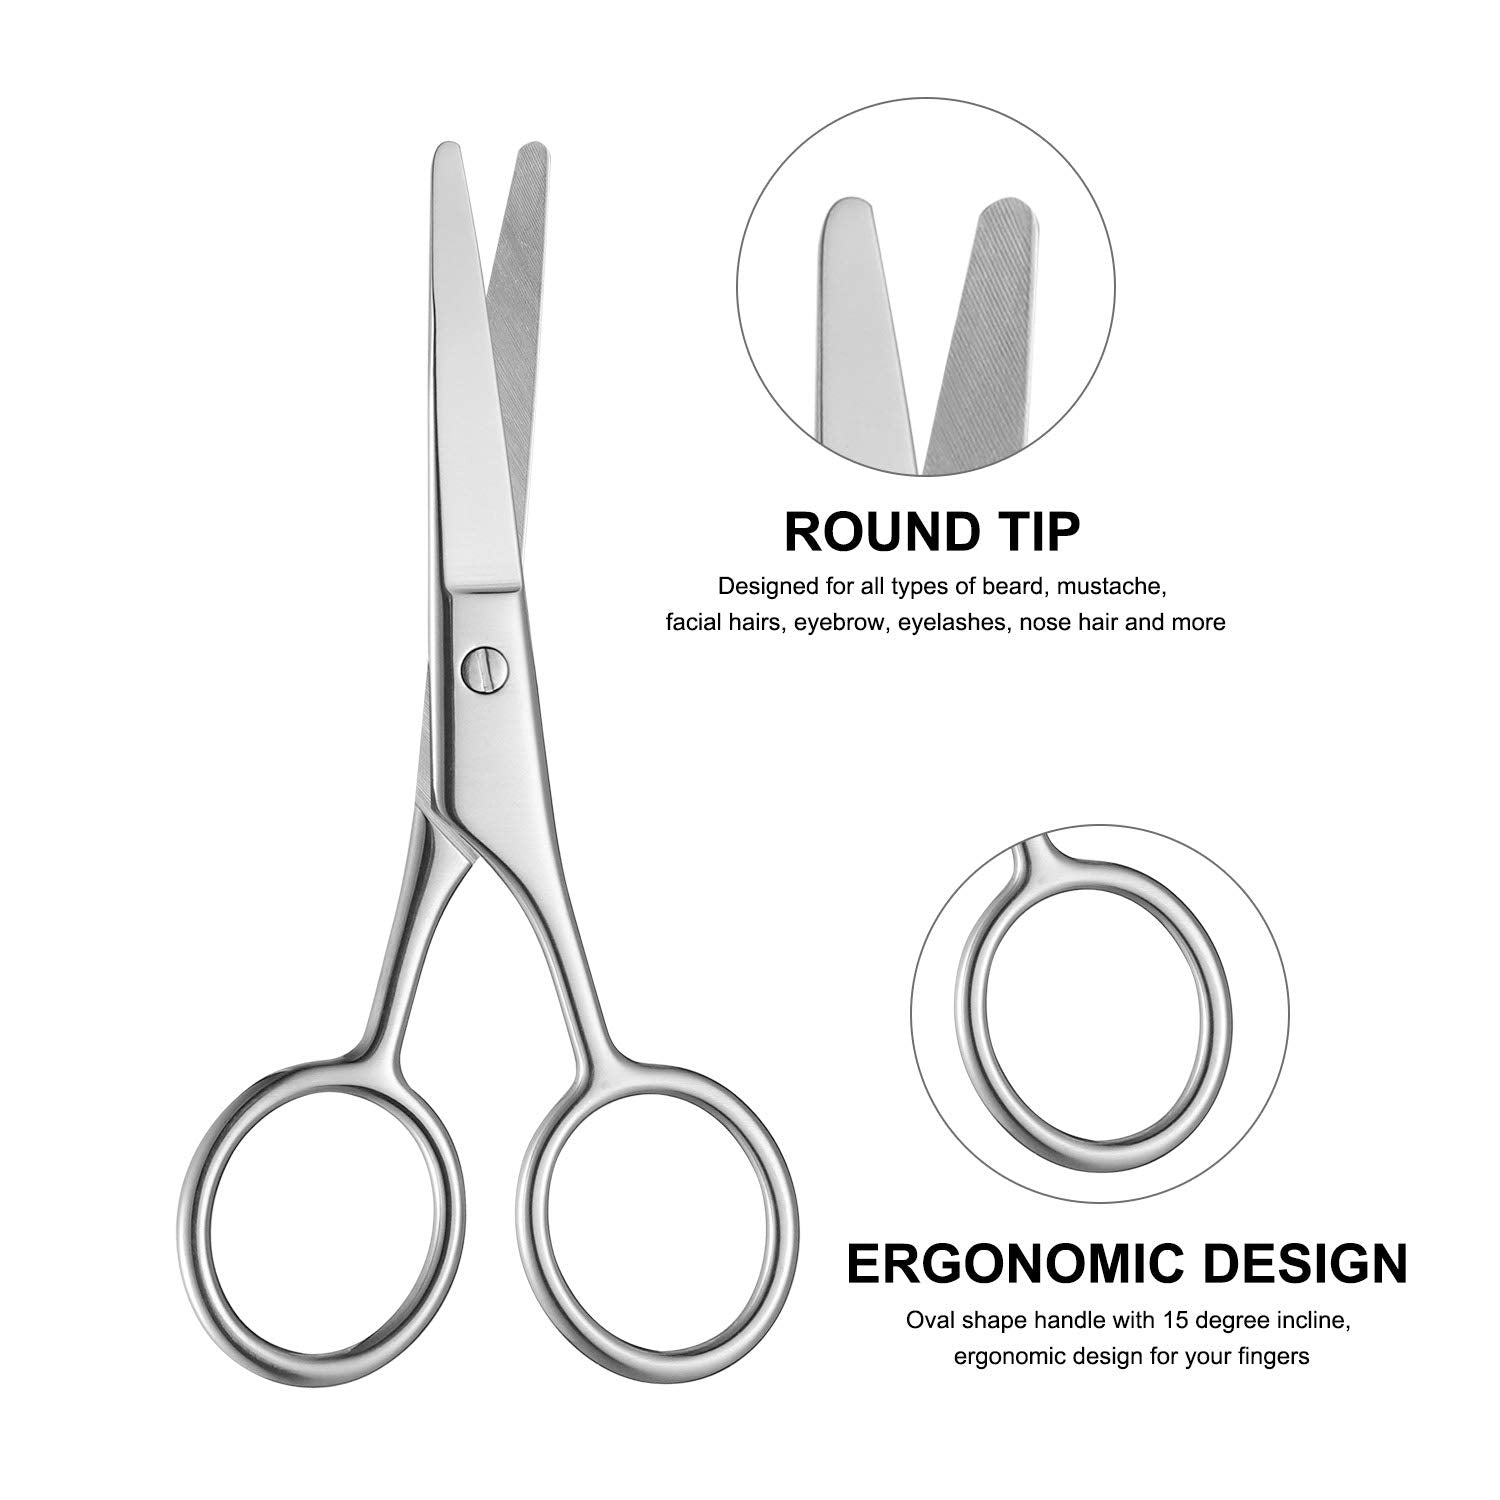 Isner Mile Professional Beard Scissors for Personal Care Facial Hair Removal and Ear Nose Eyebrow Trimming Stainless Steel Fine Round-Tip Scissors-